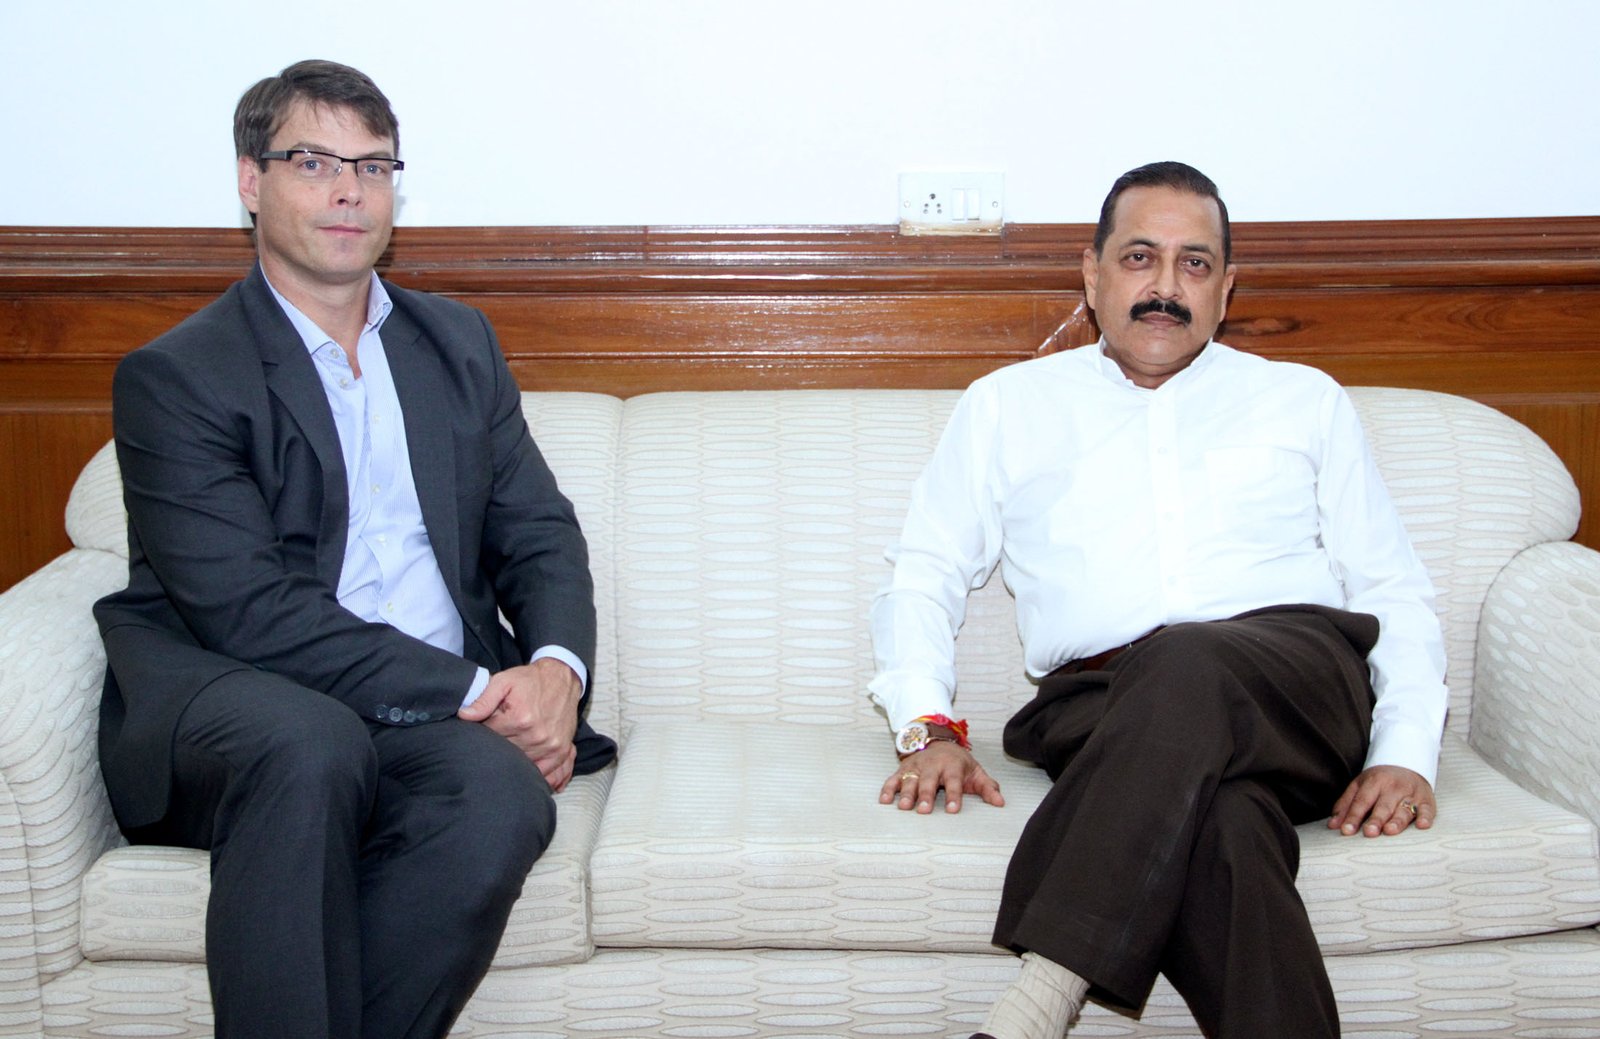 The high commissioner of Australia to India, Mr Patrick Suckling calling on the minister of state for science and technoloy, Dr Jitendra Singh, in New Delhi on August 26, 2014.